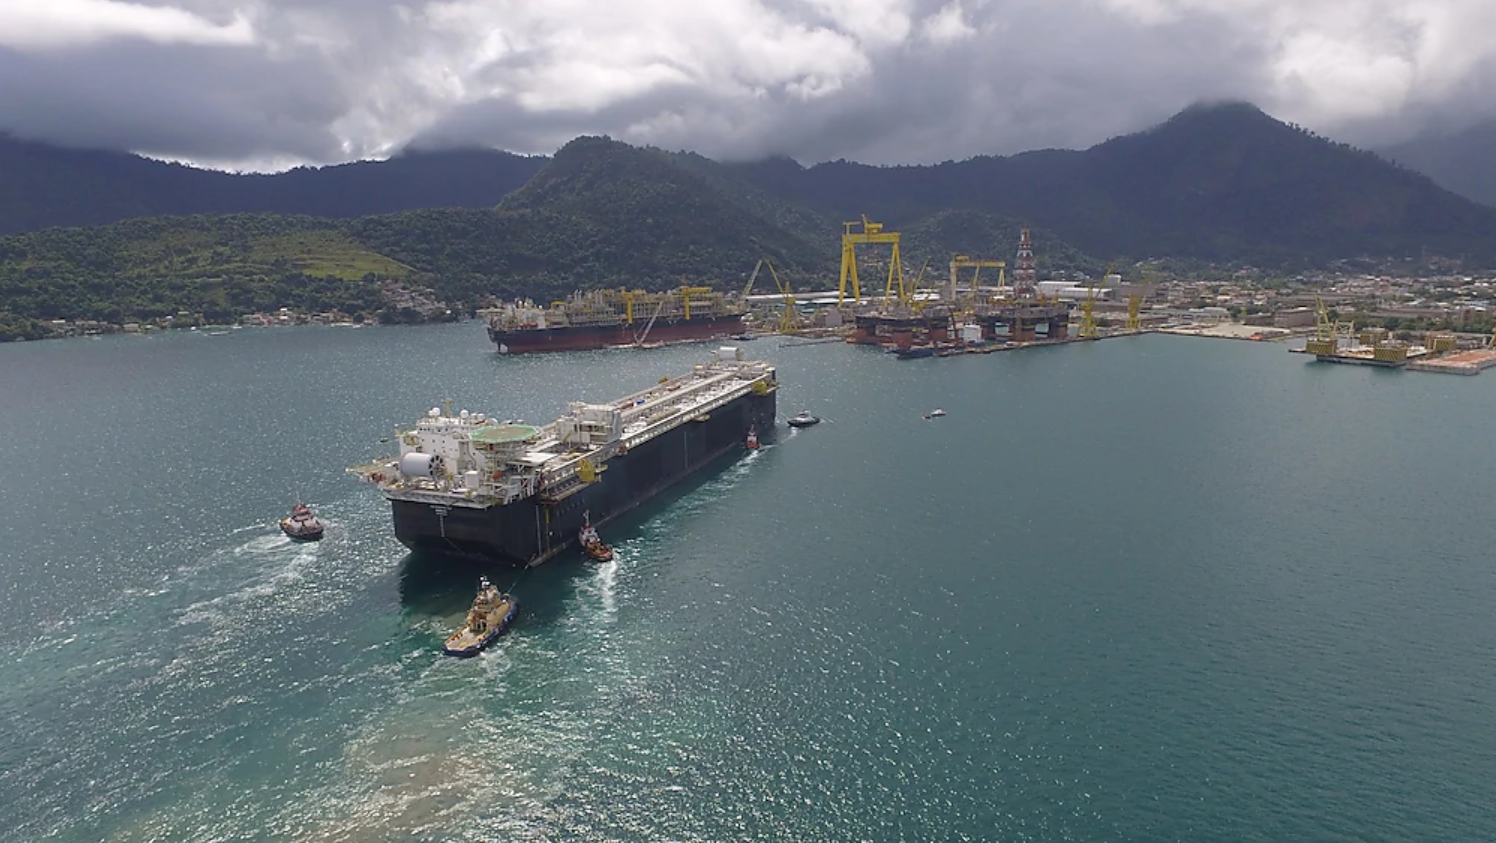 Operated by Petrobras, the FPSO P-69 is a standardized production vessel offshore Brazil with a capacity for 150,000 barrels of oil and 6 million cubic feet of natural gas a day. (Source: Royal Dutch Shell Plc)